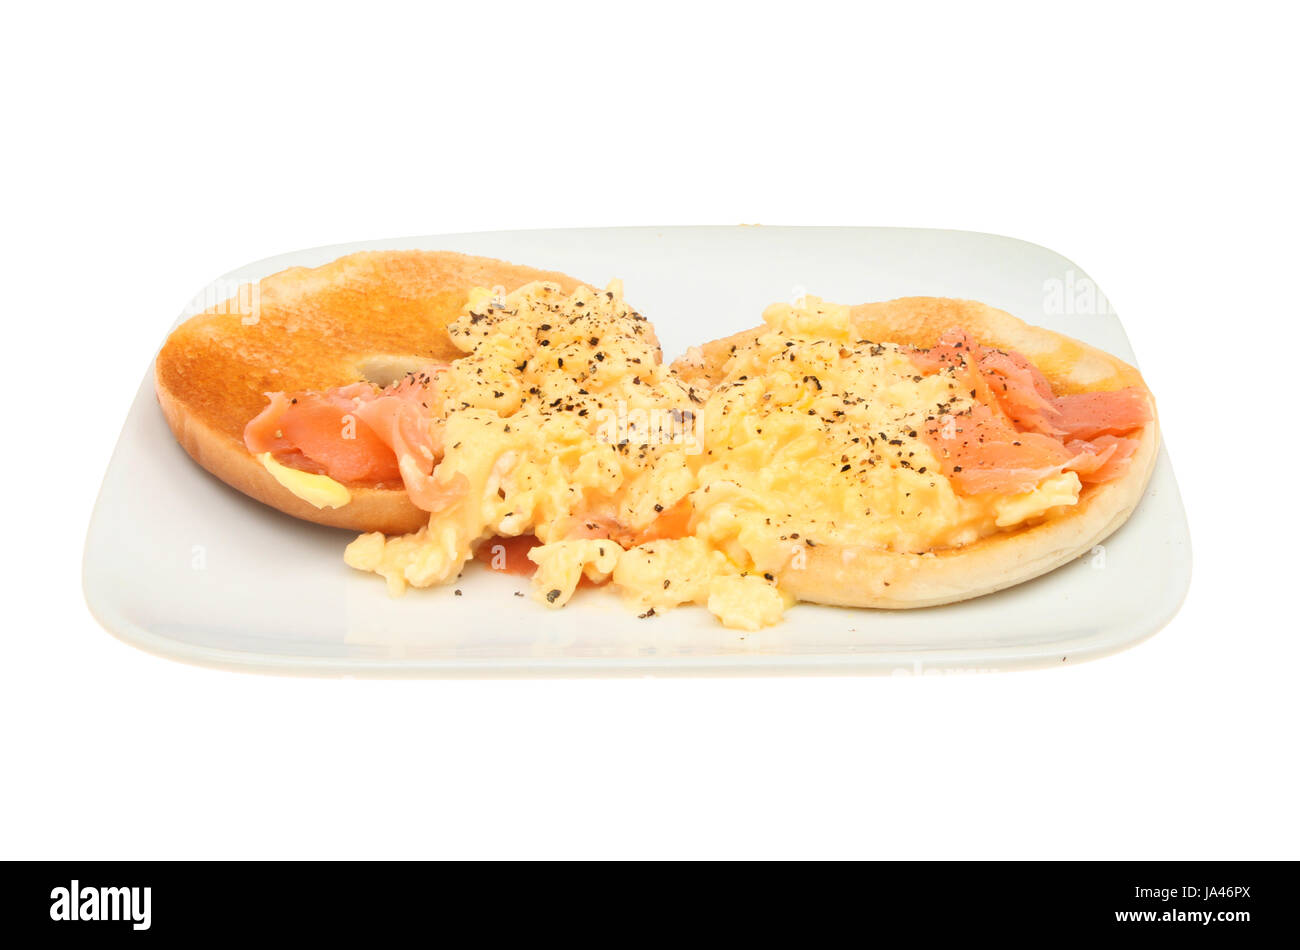 Smoked salmon and scrambled egg on toasted bagels on a plate isolated against white Stock Photo